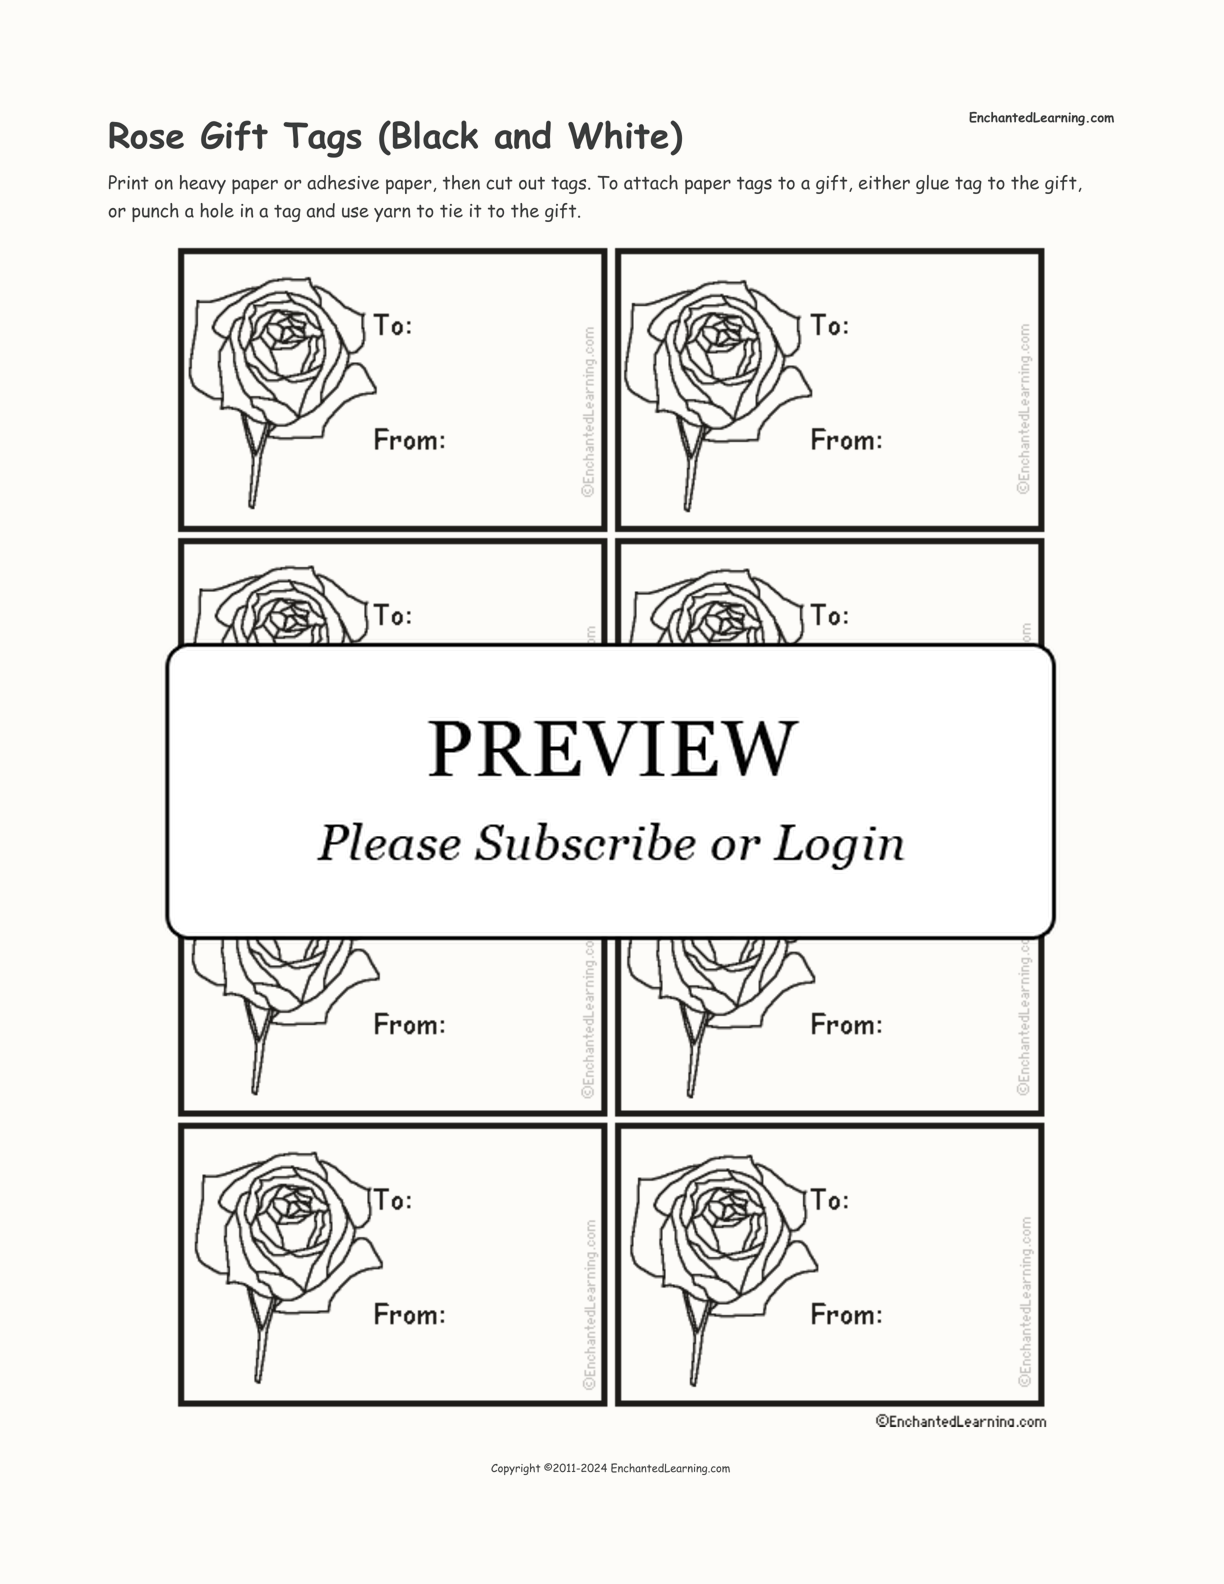 Rose Gift Tags (Black and White) interactive printout page 1